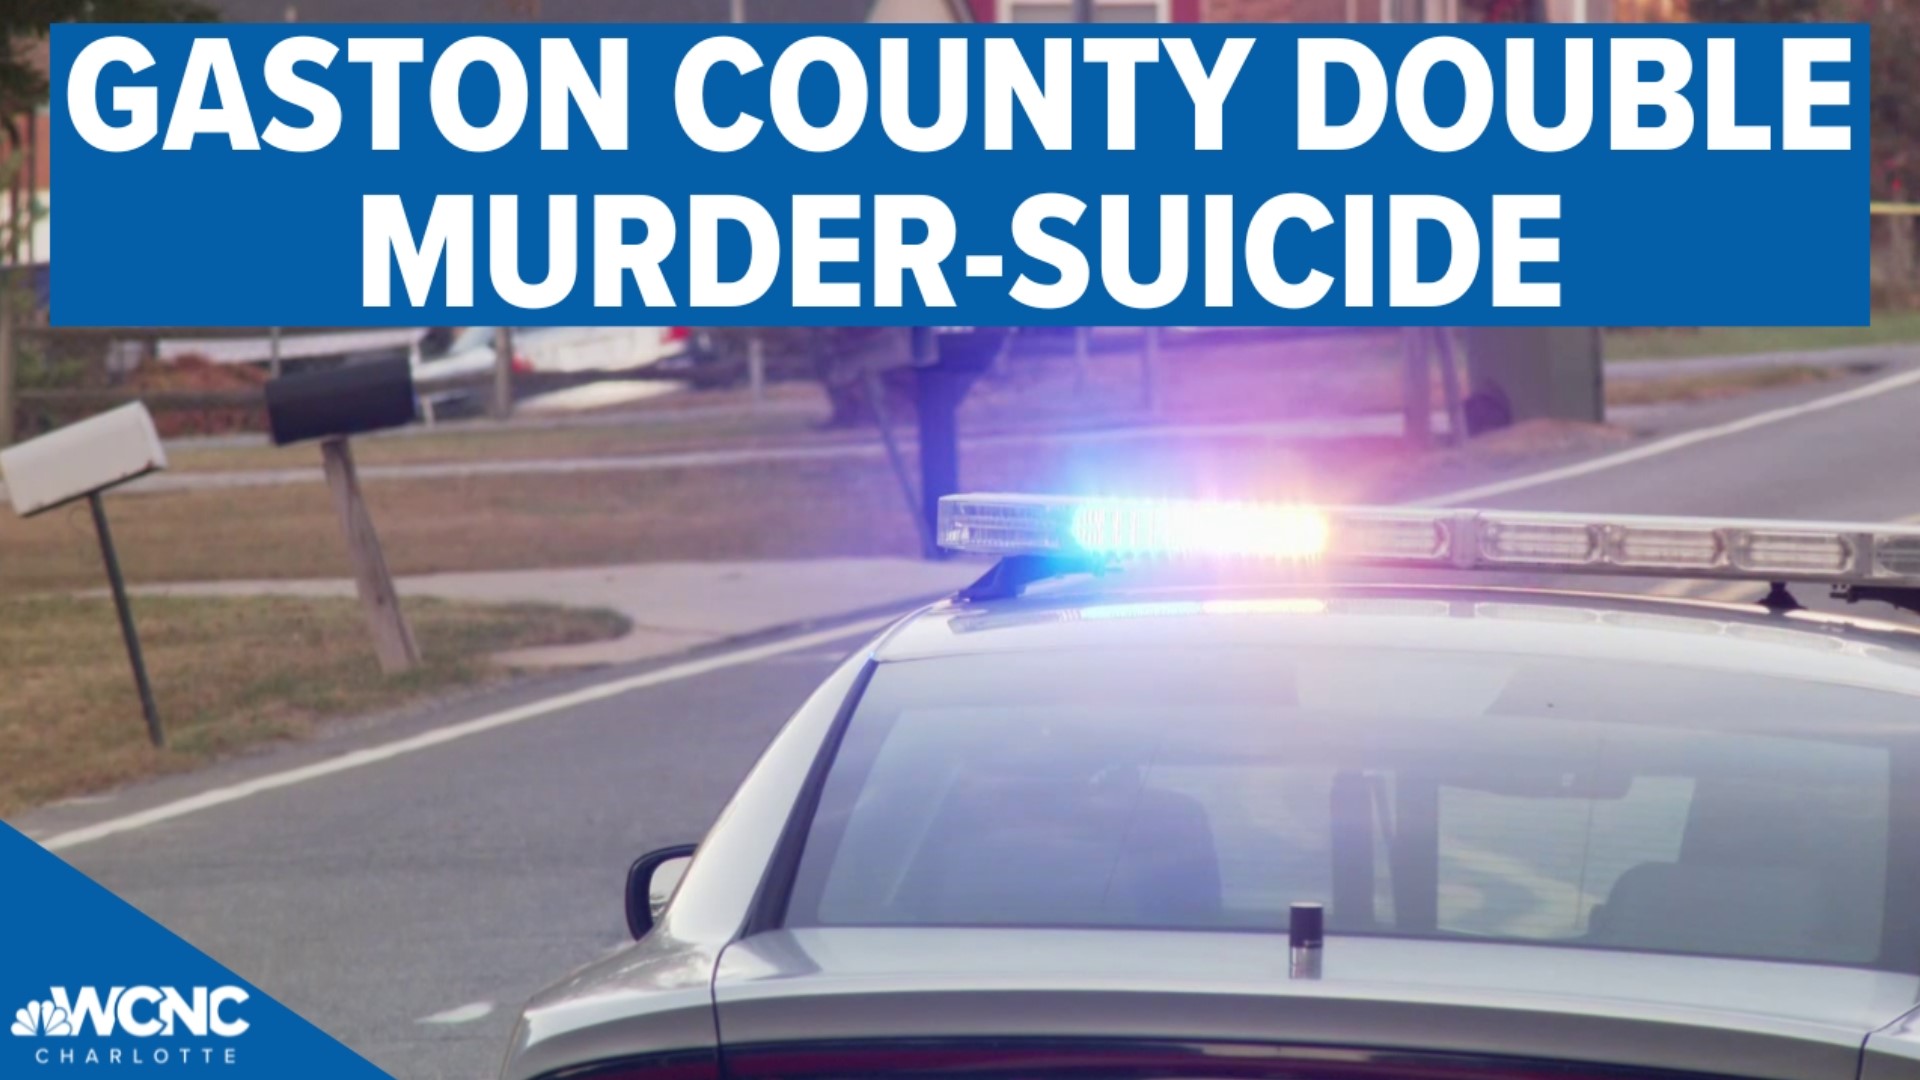 Gaston County officials told WCNC Charlotte that a Gastonia man killed his mother and another person before turning the gun on himself.